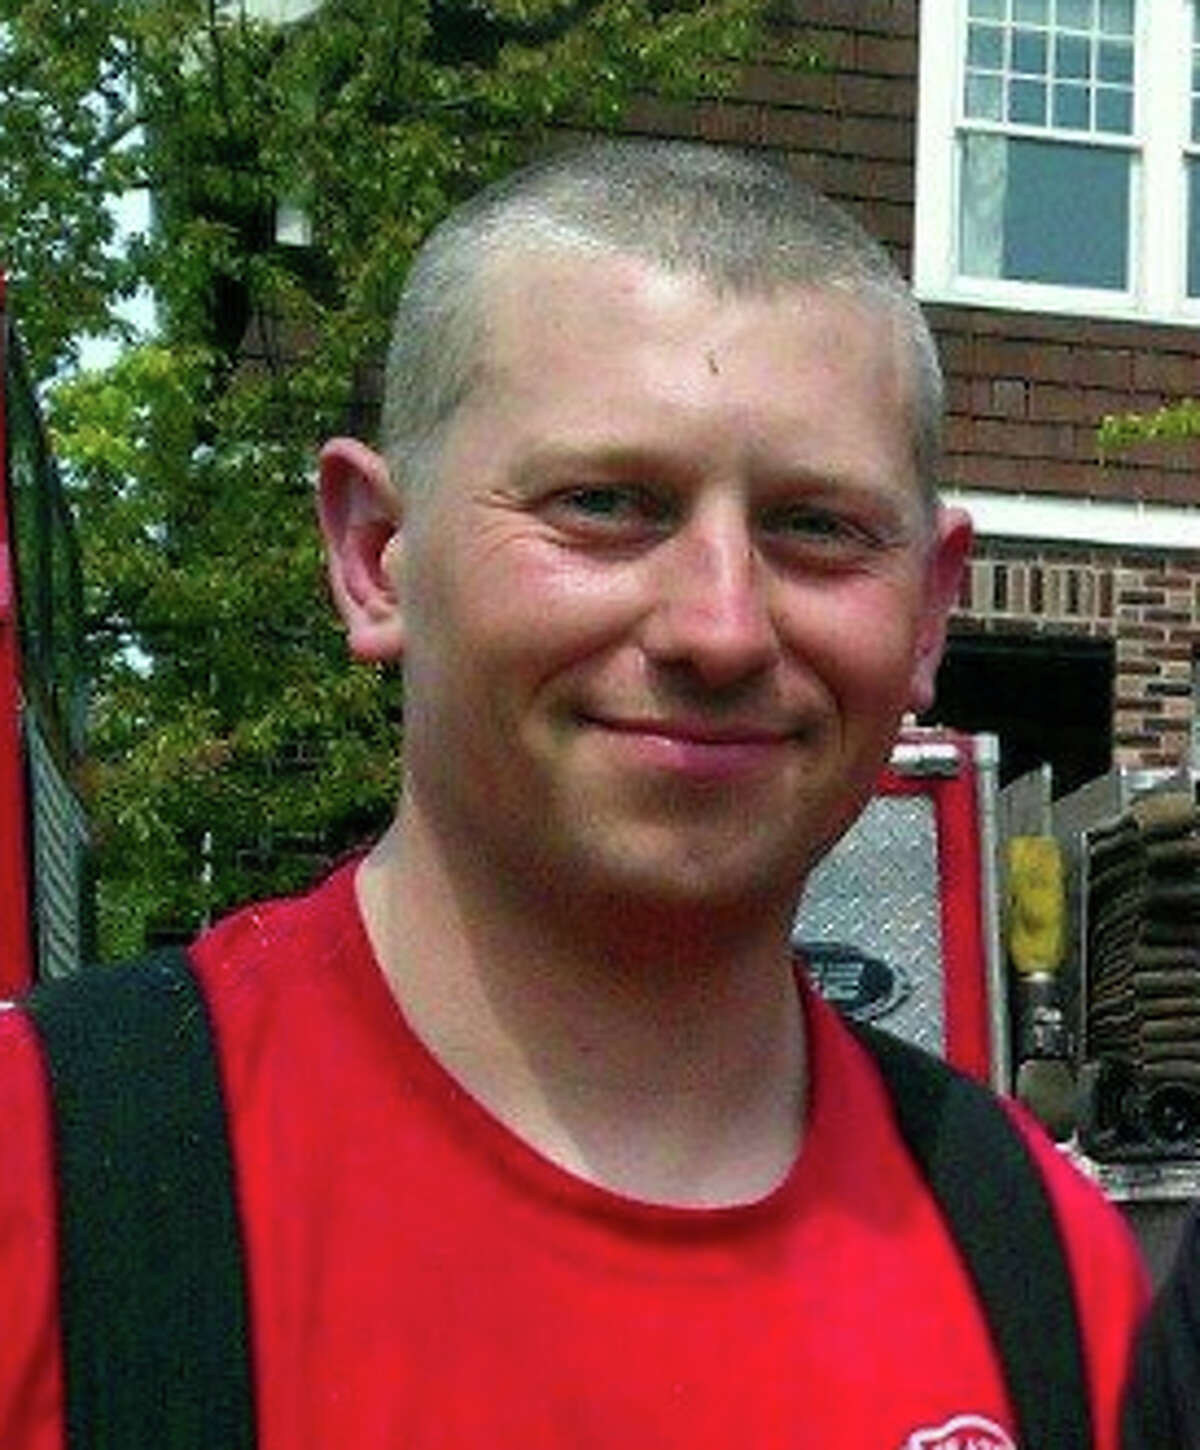 Seattle firefighter Joshua Ryan Milton, 36, has been missing since Thursday evening. Anyone with information is asked to call 911.